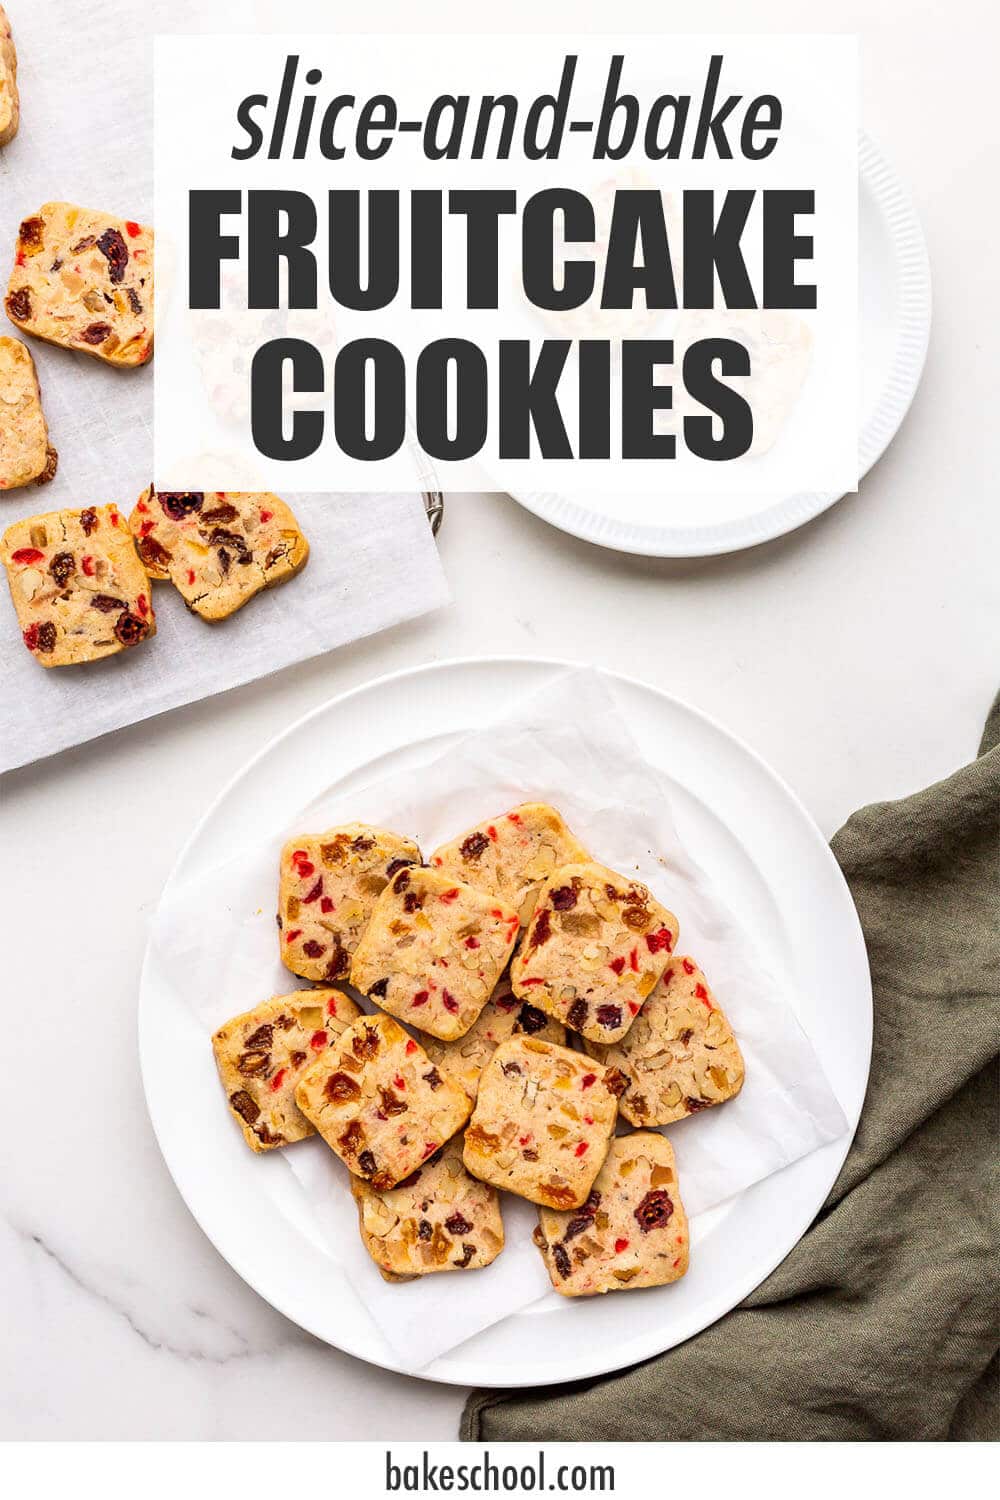 A plate of fruitcake cookies ready to be served.